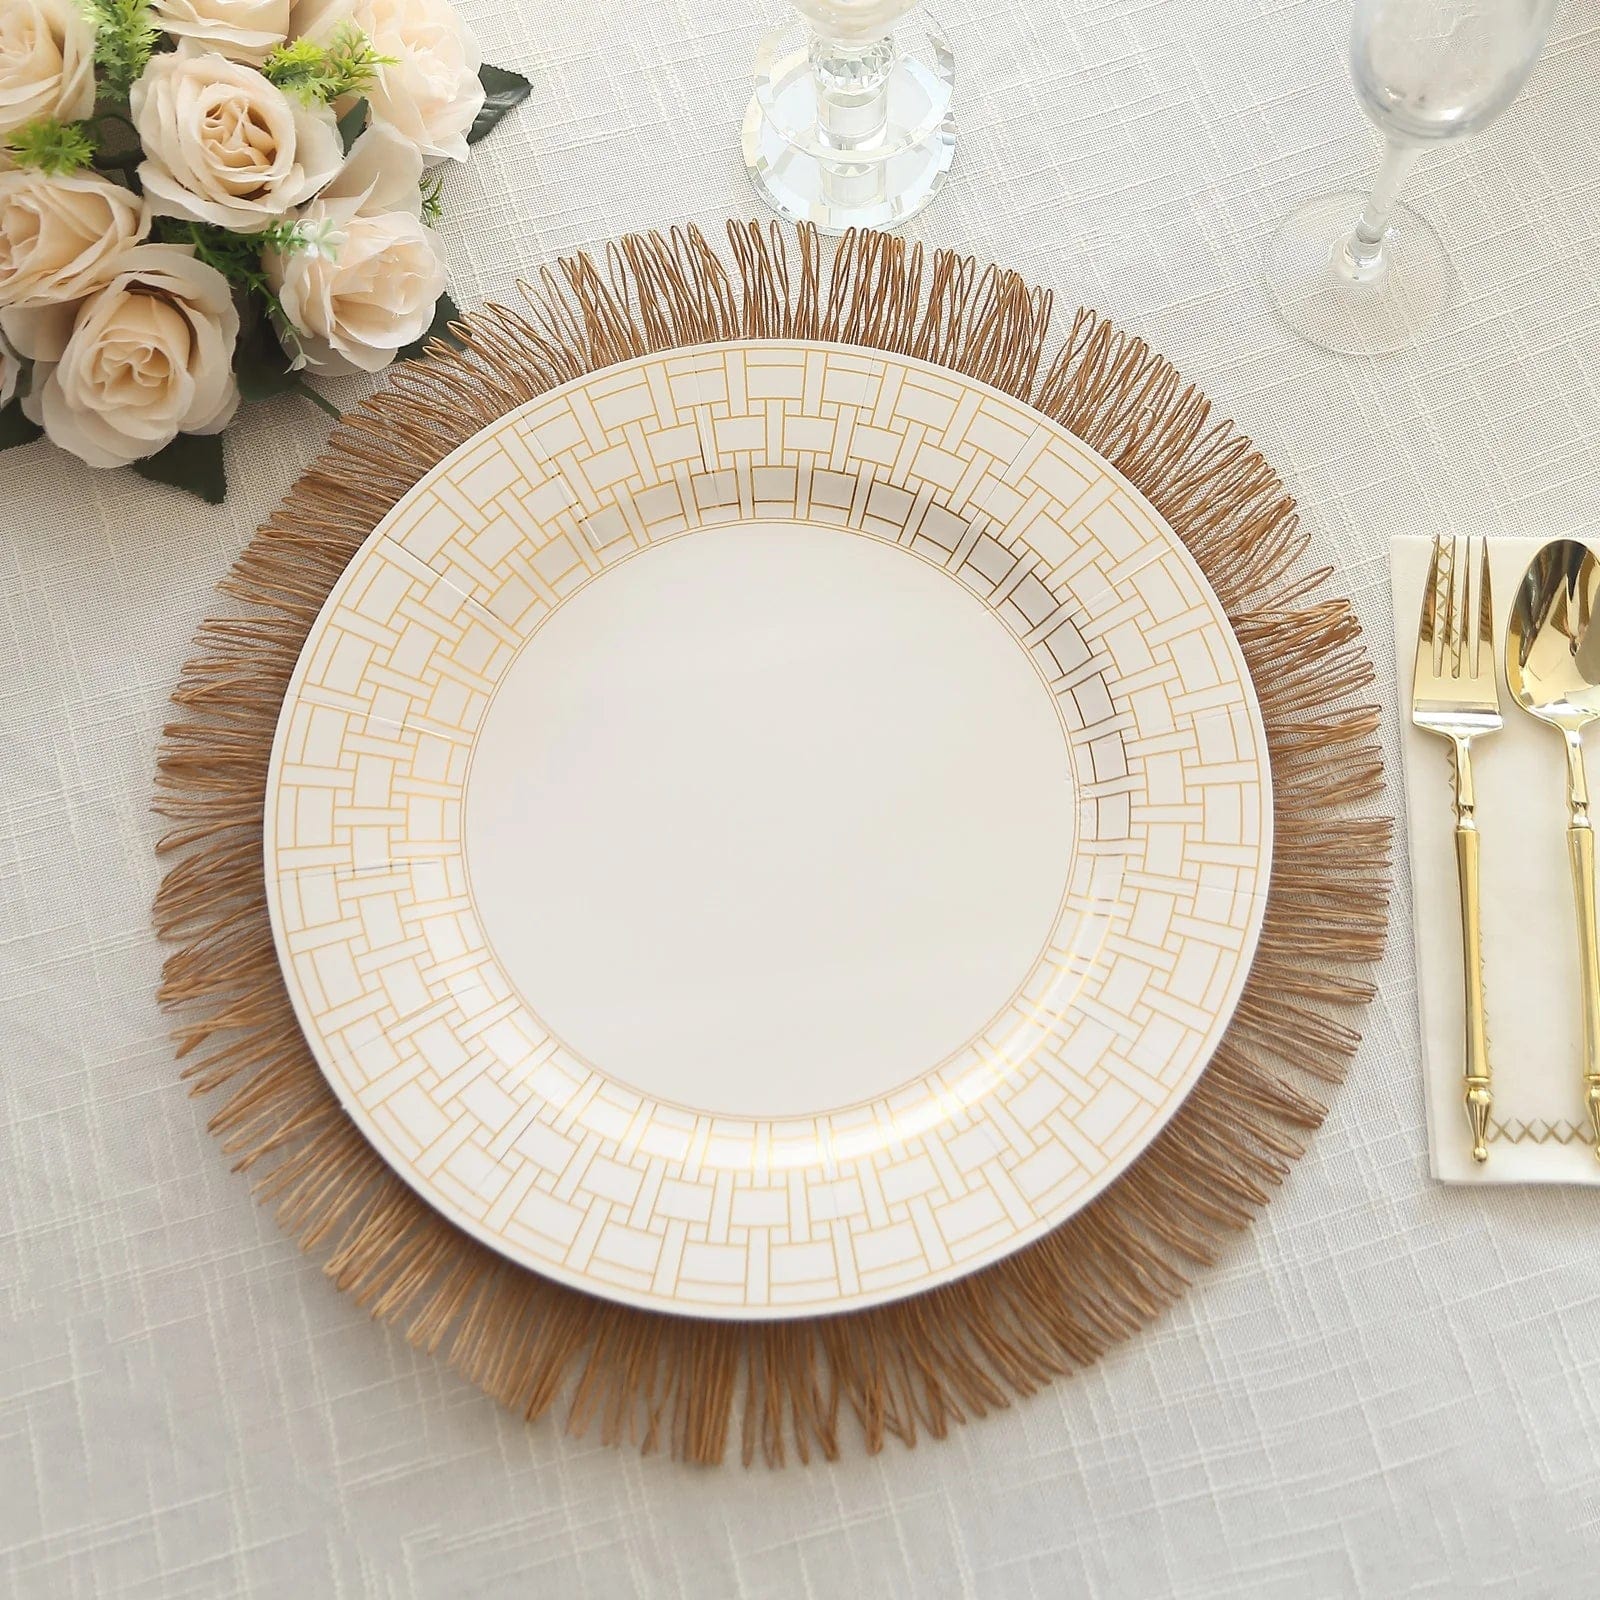 10 White Disposable Paper Charger Plates with Gold Basketweave Design Rim